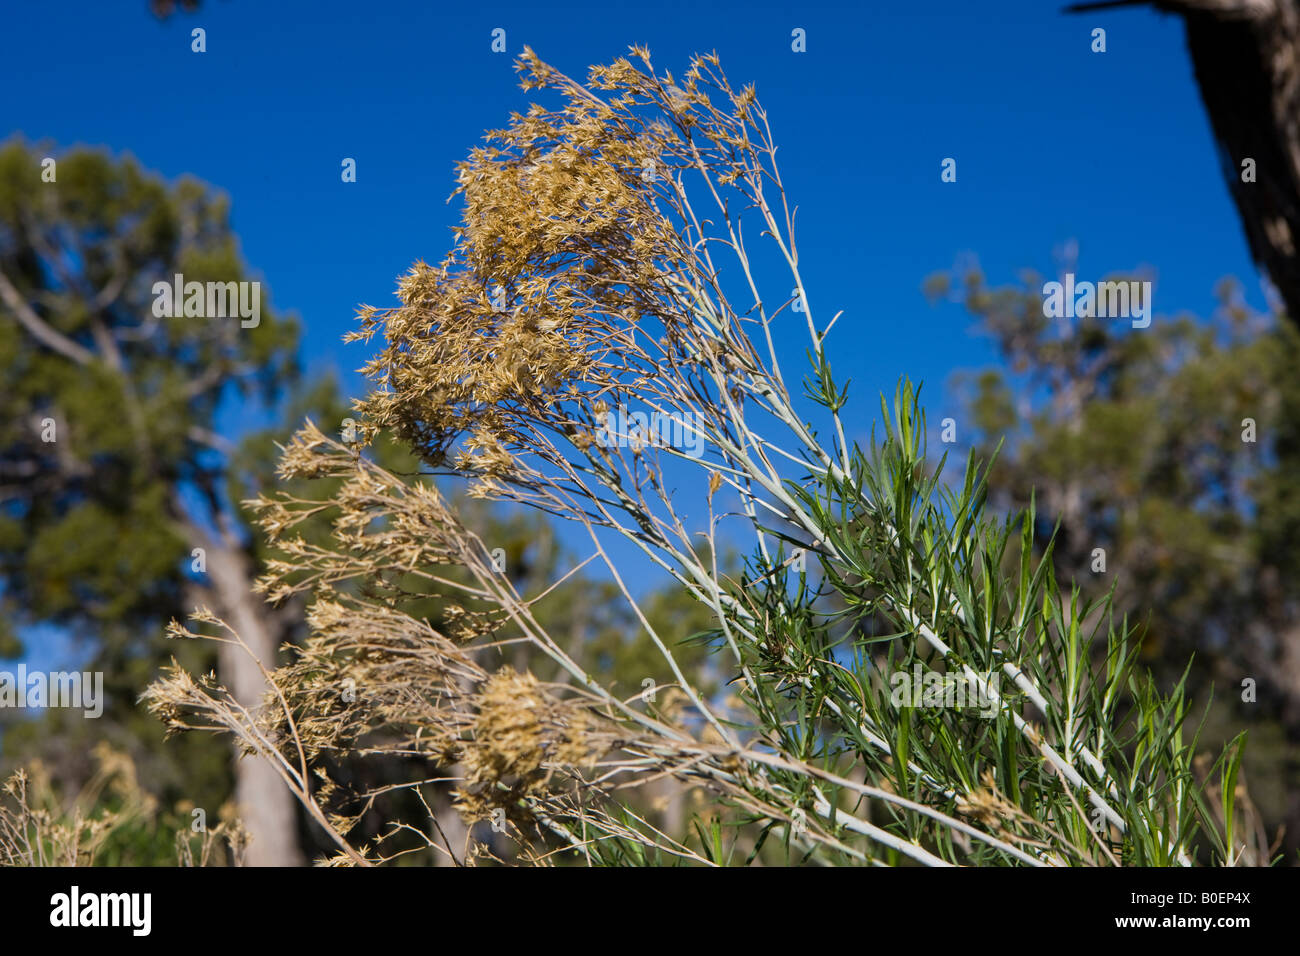 Chrysothamnus nauseosus also known as gray rabbitbrush rubber rabbitbrush or Chamisa a shrub that grows in Western N America Stock Photo